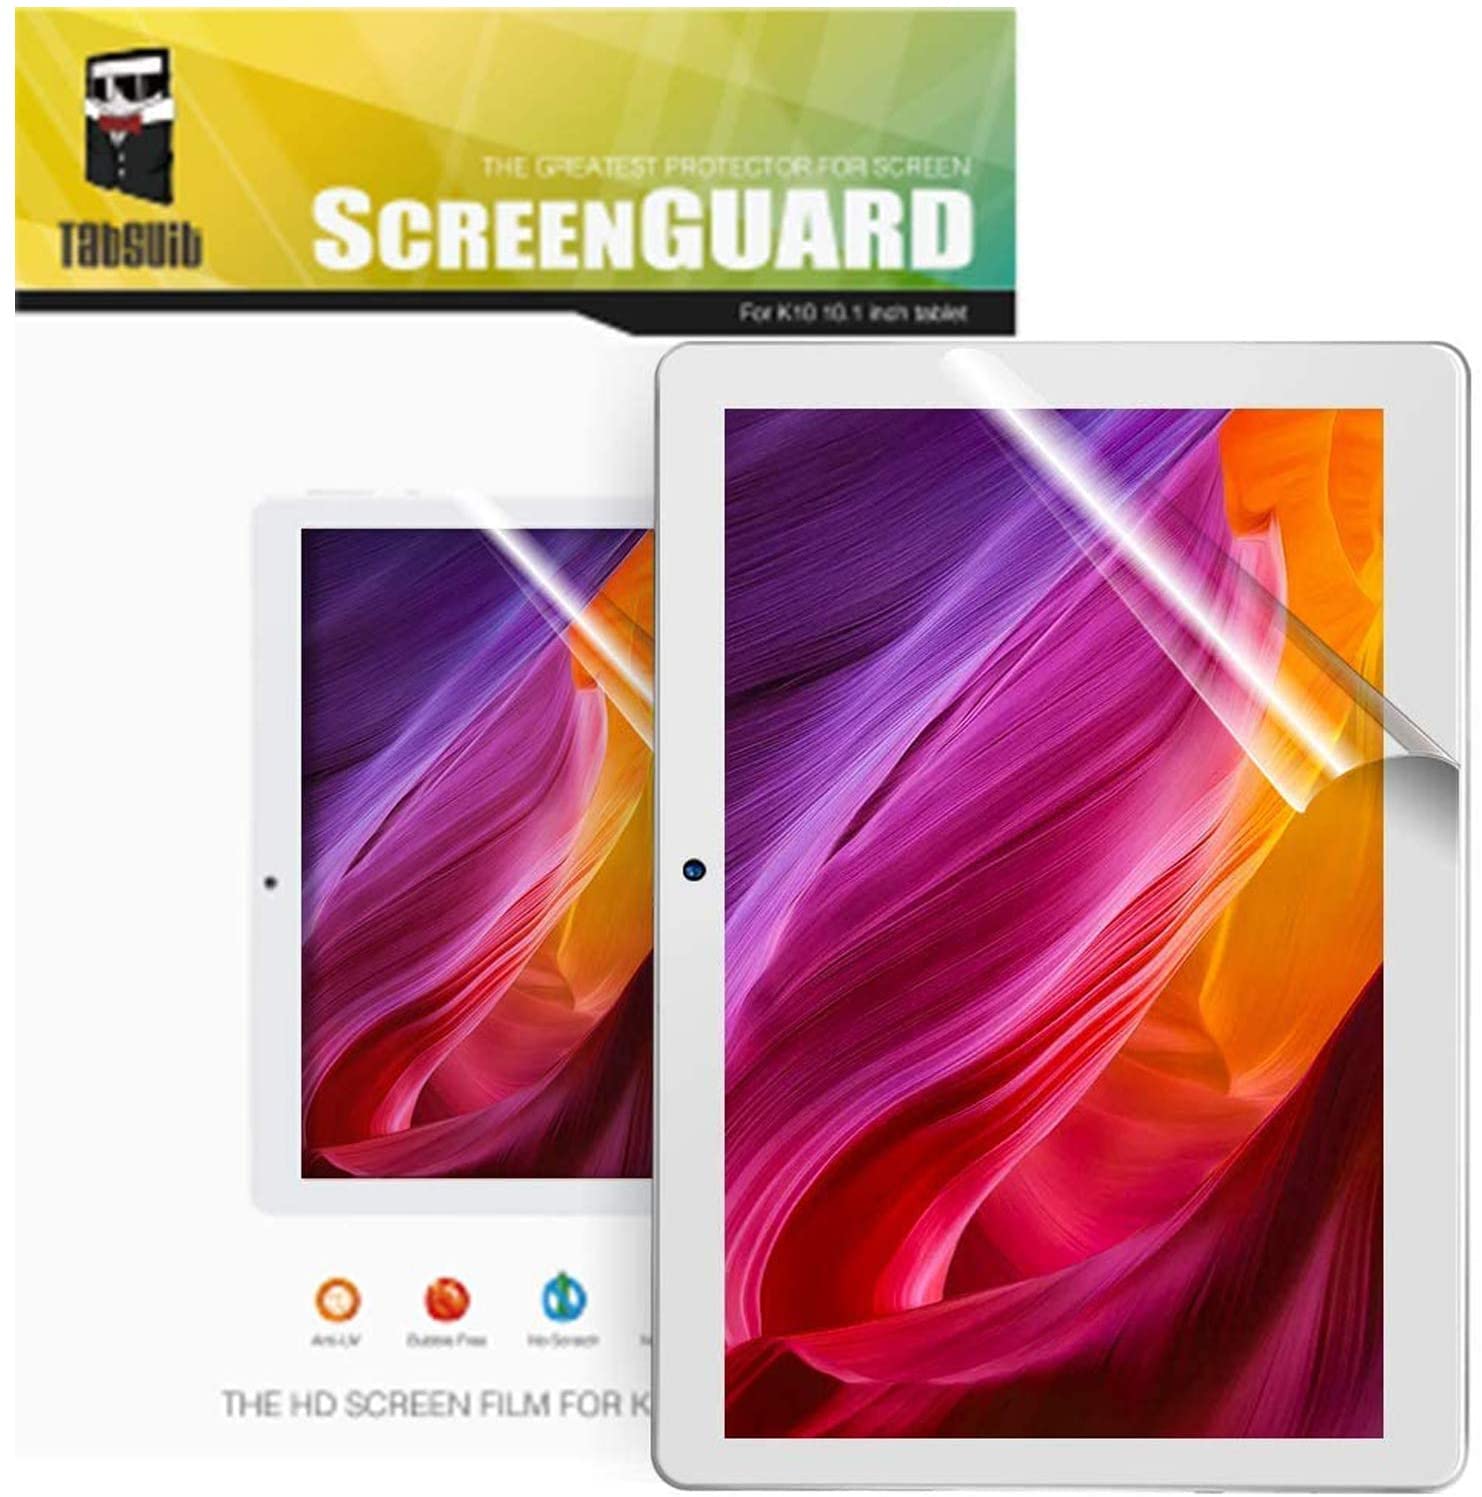 TabSuit Dragon Touch K10 Screen Protector Ultra-Clear of High Definition (HD)-3 Pack for Dragon Touch K10 / Notepad K10/ Y88X 10 Kids Tablet 10.1" Tablet. - e4cents